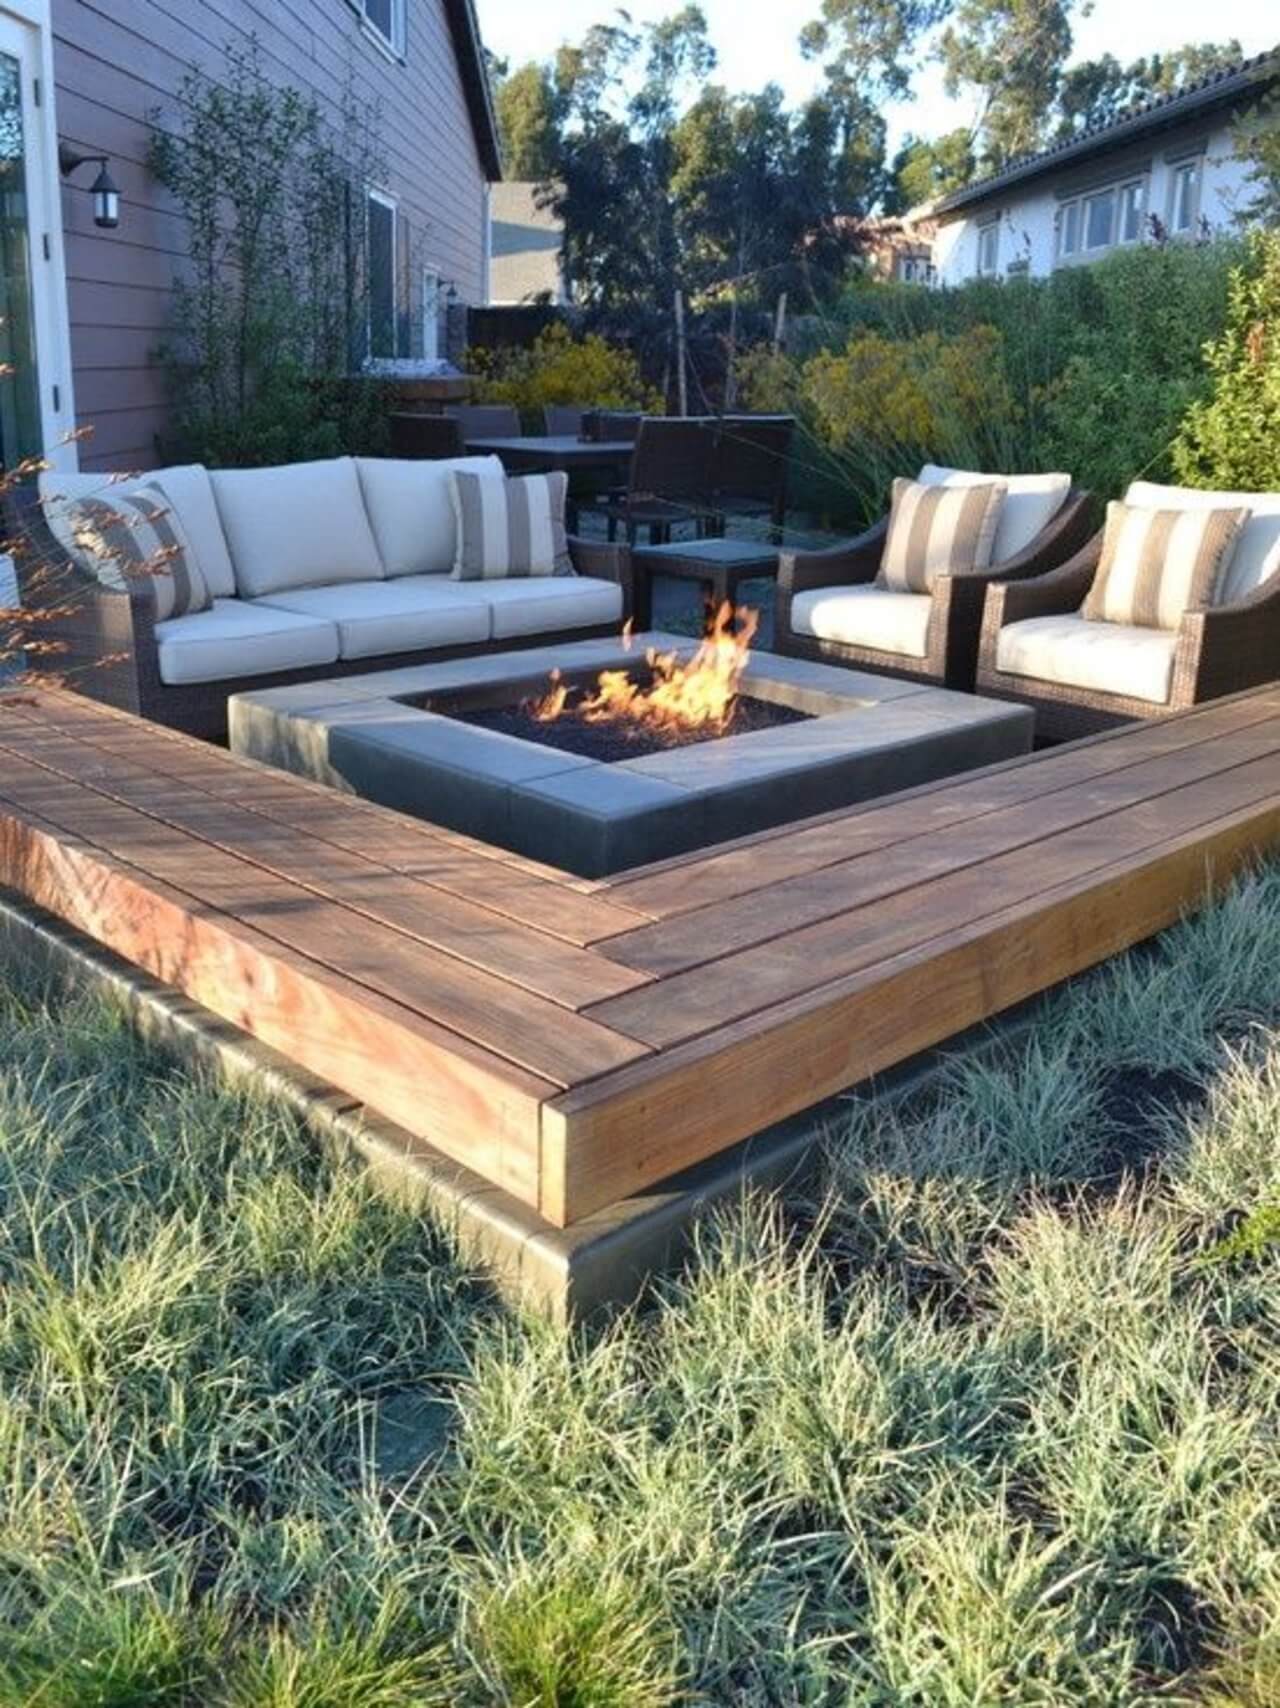 Centered Fire Pit With Sofa and Matching Armchairs